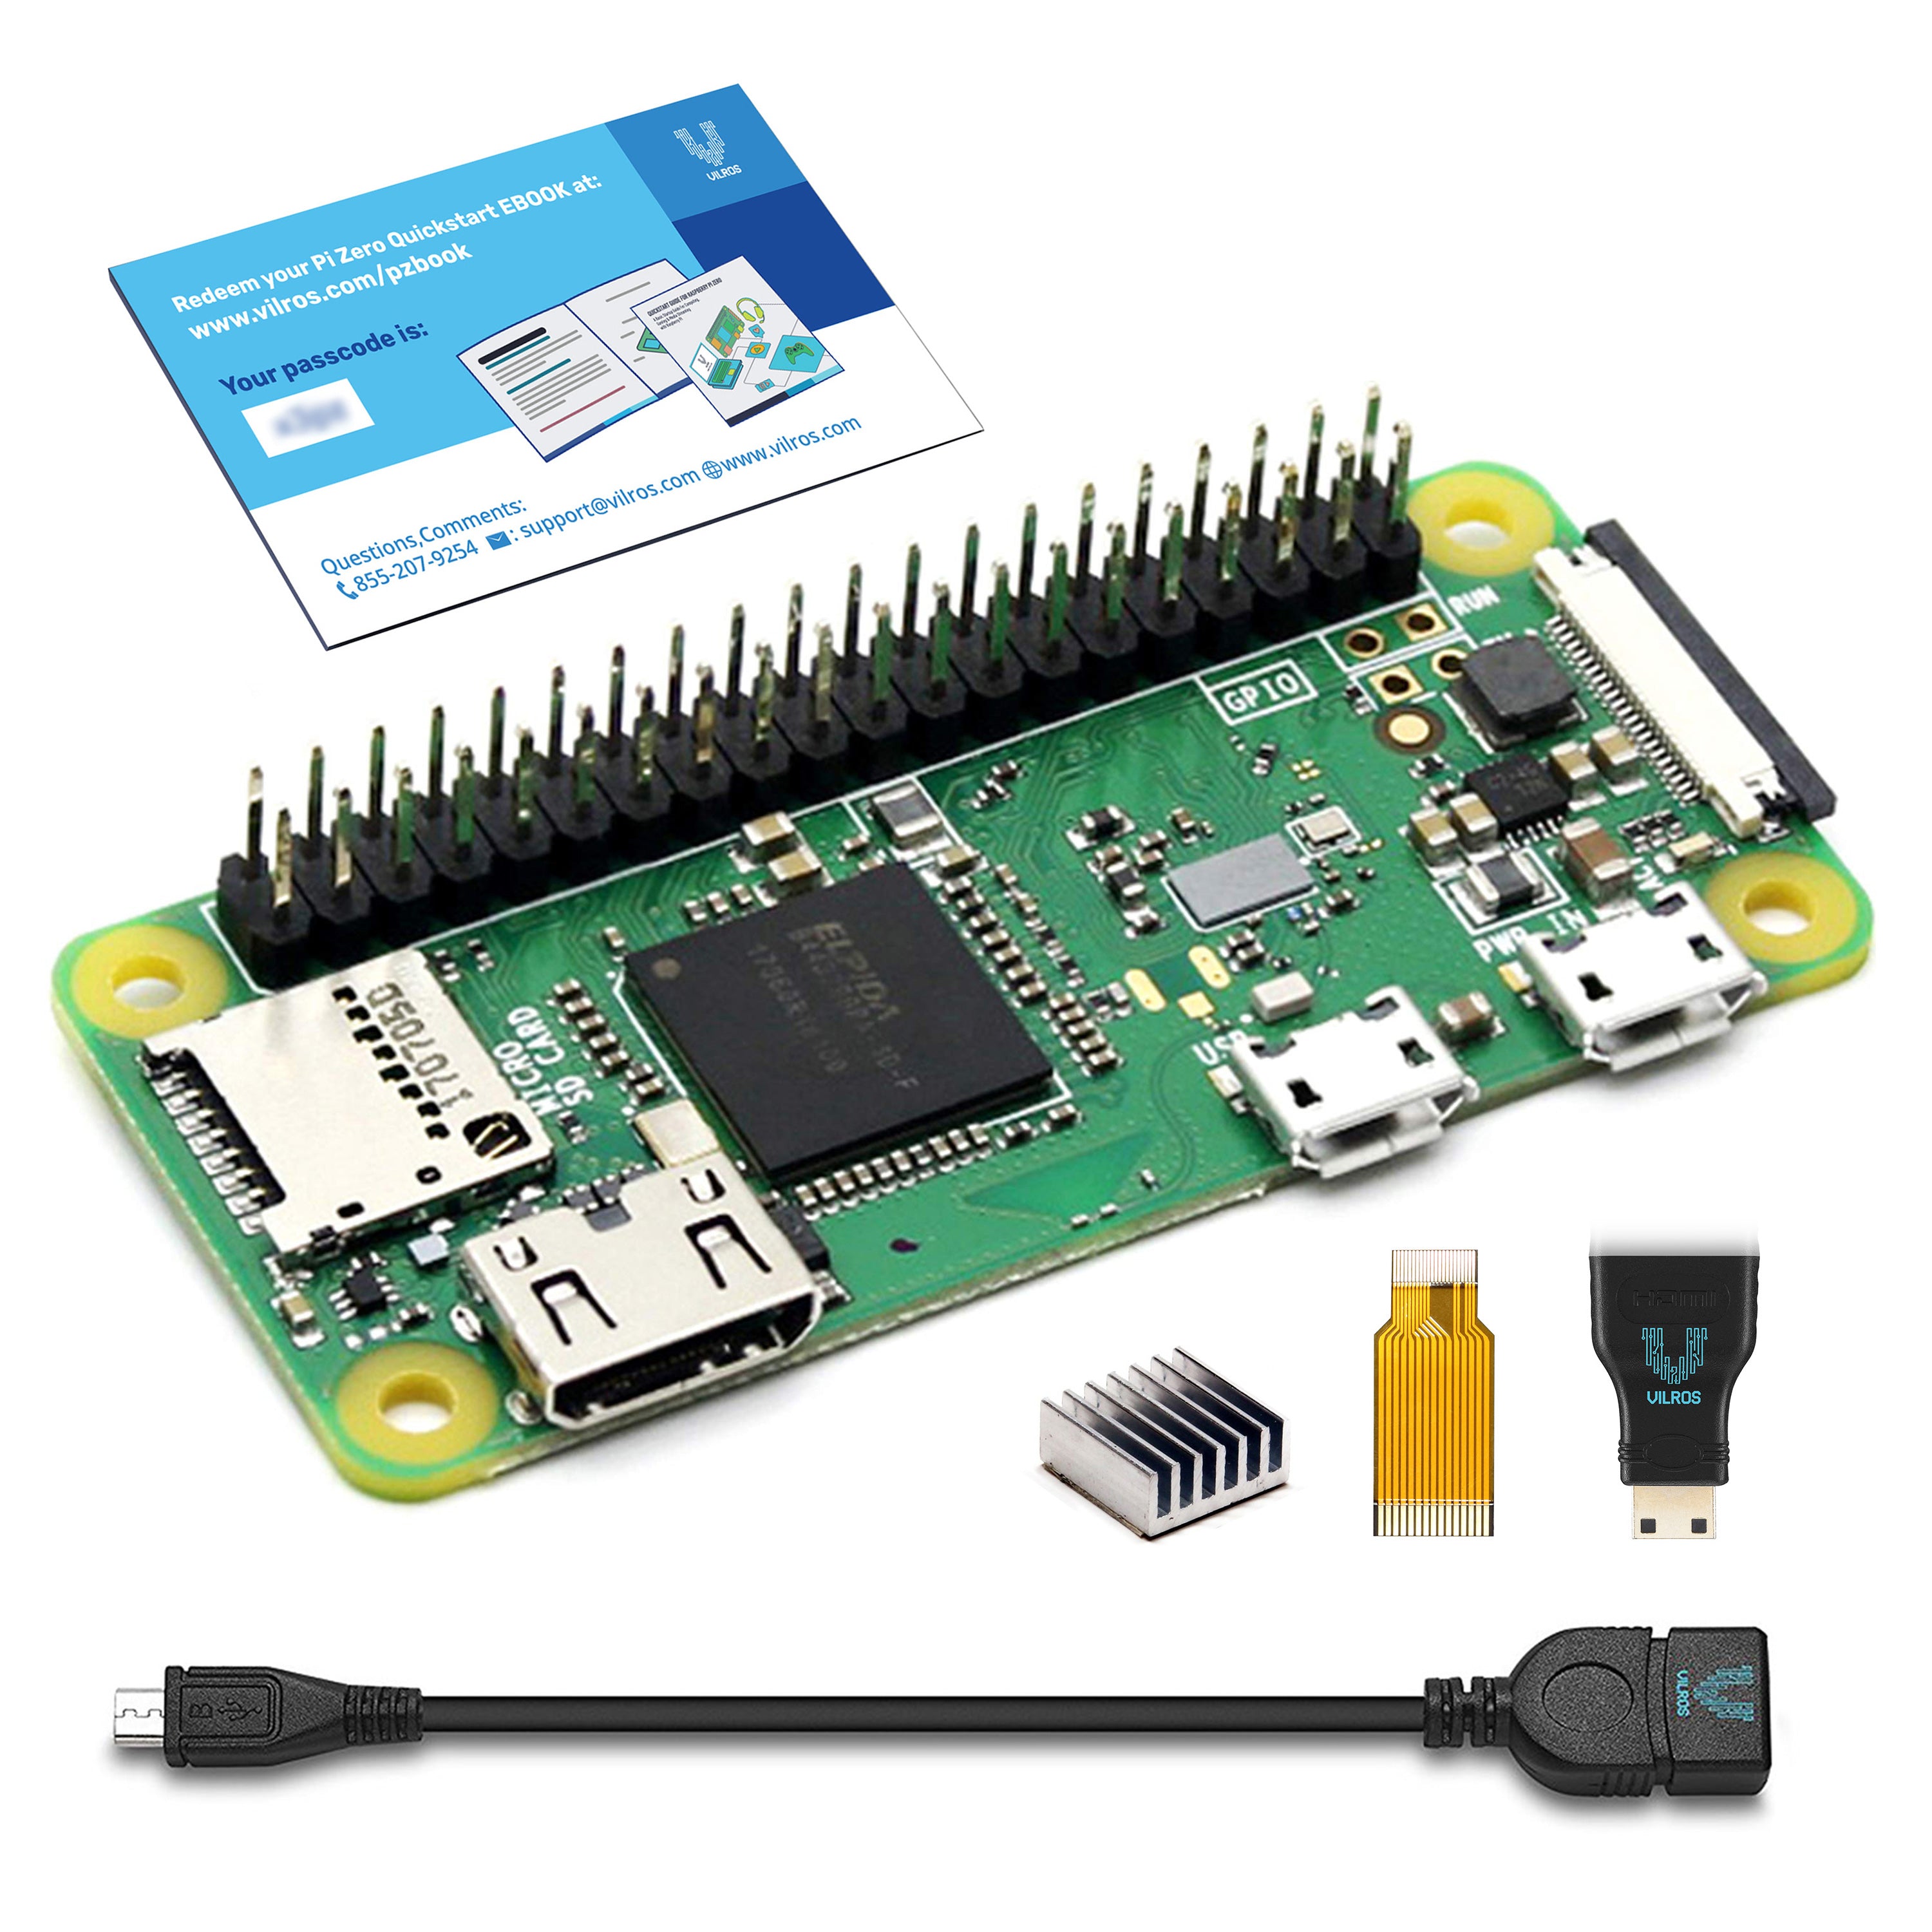 Raspberry Pi Zero W with Vilros Adapters and User Guide E-Book-Includes USB  OTG Adapter, HDMI Adapter, Camera Module Adapter, 40 Pin Header, Heatsink 